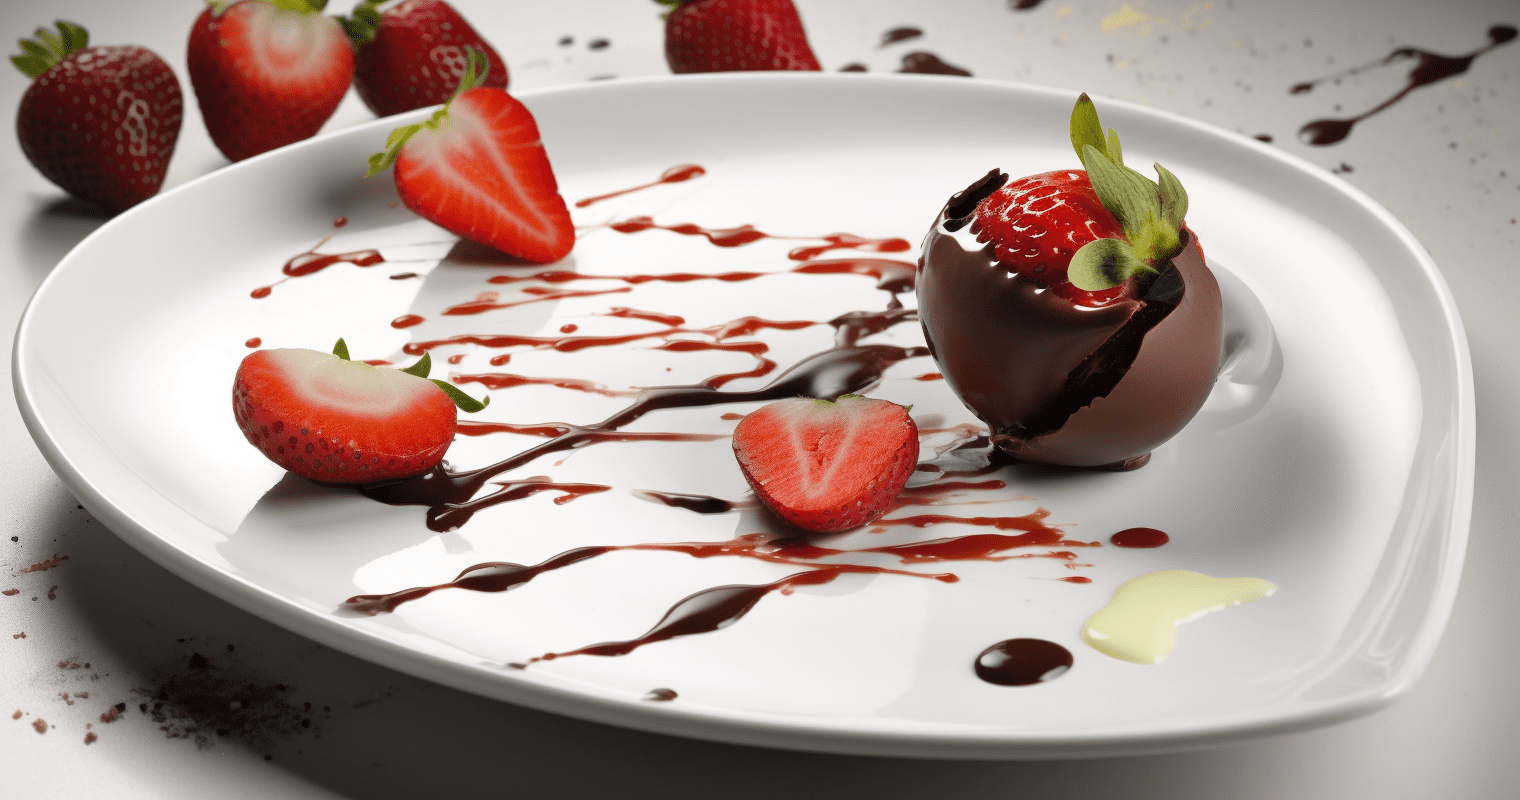 Image of chocolate-covered strawberries